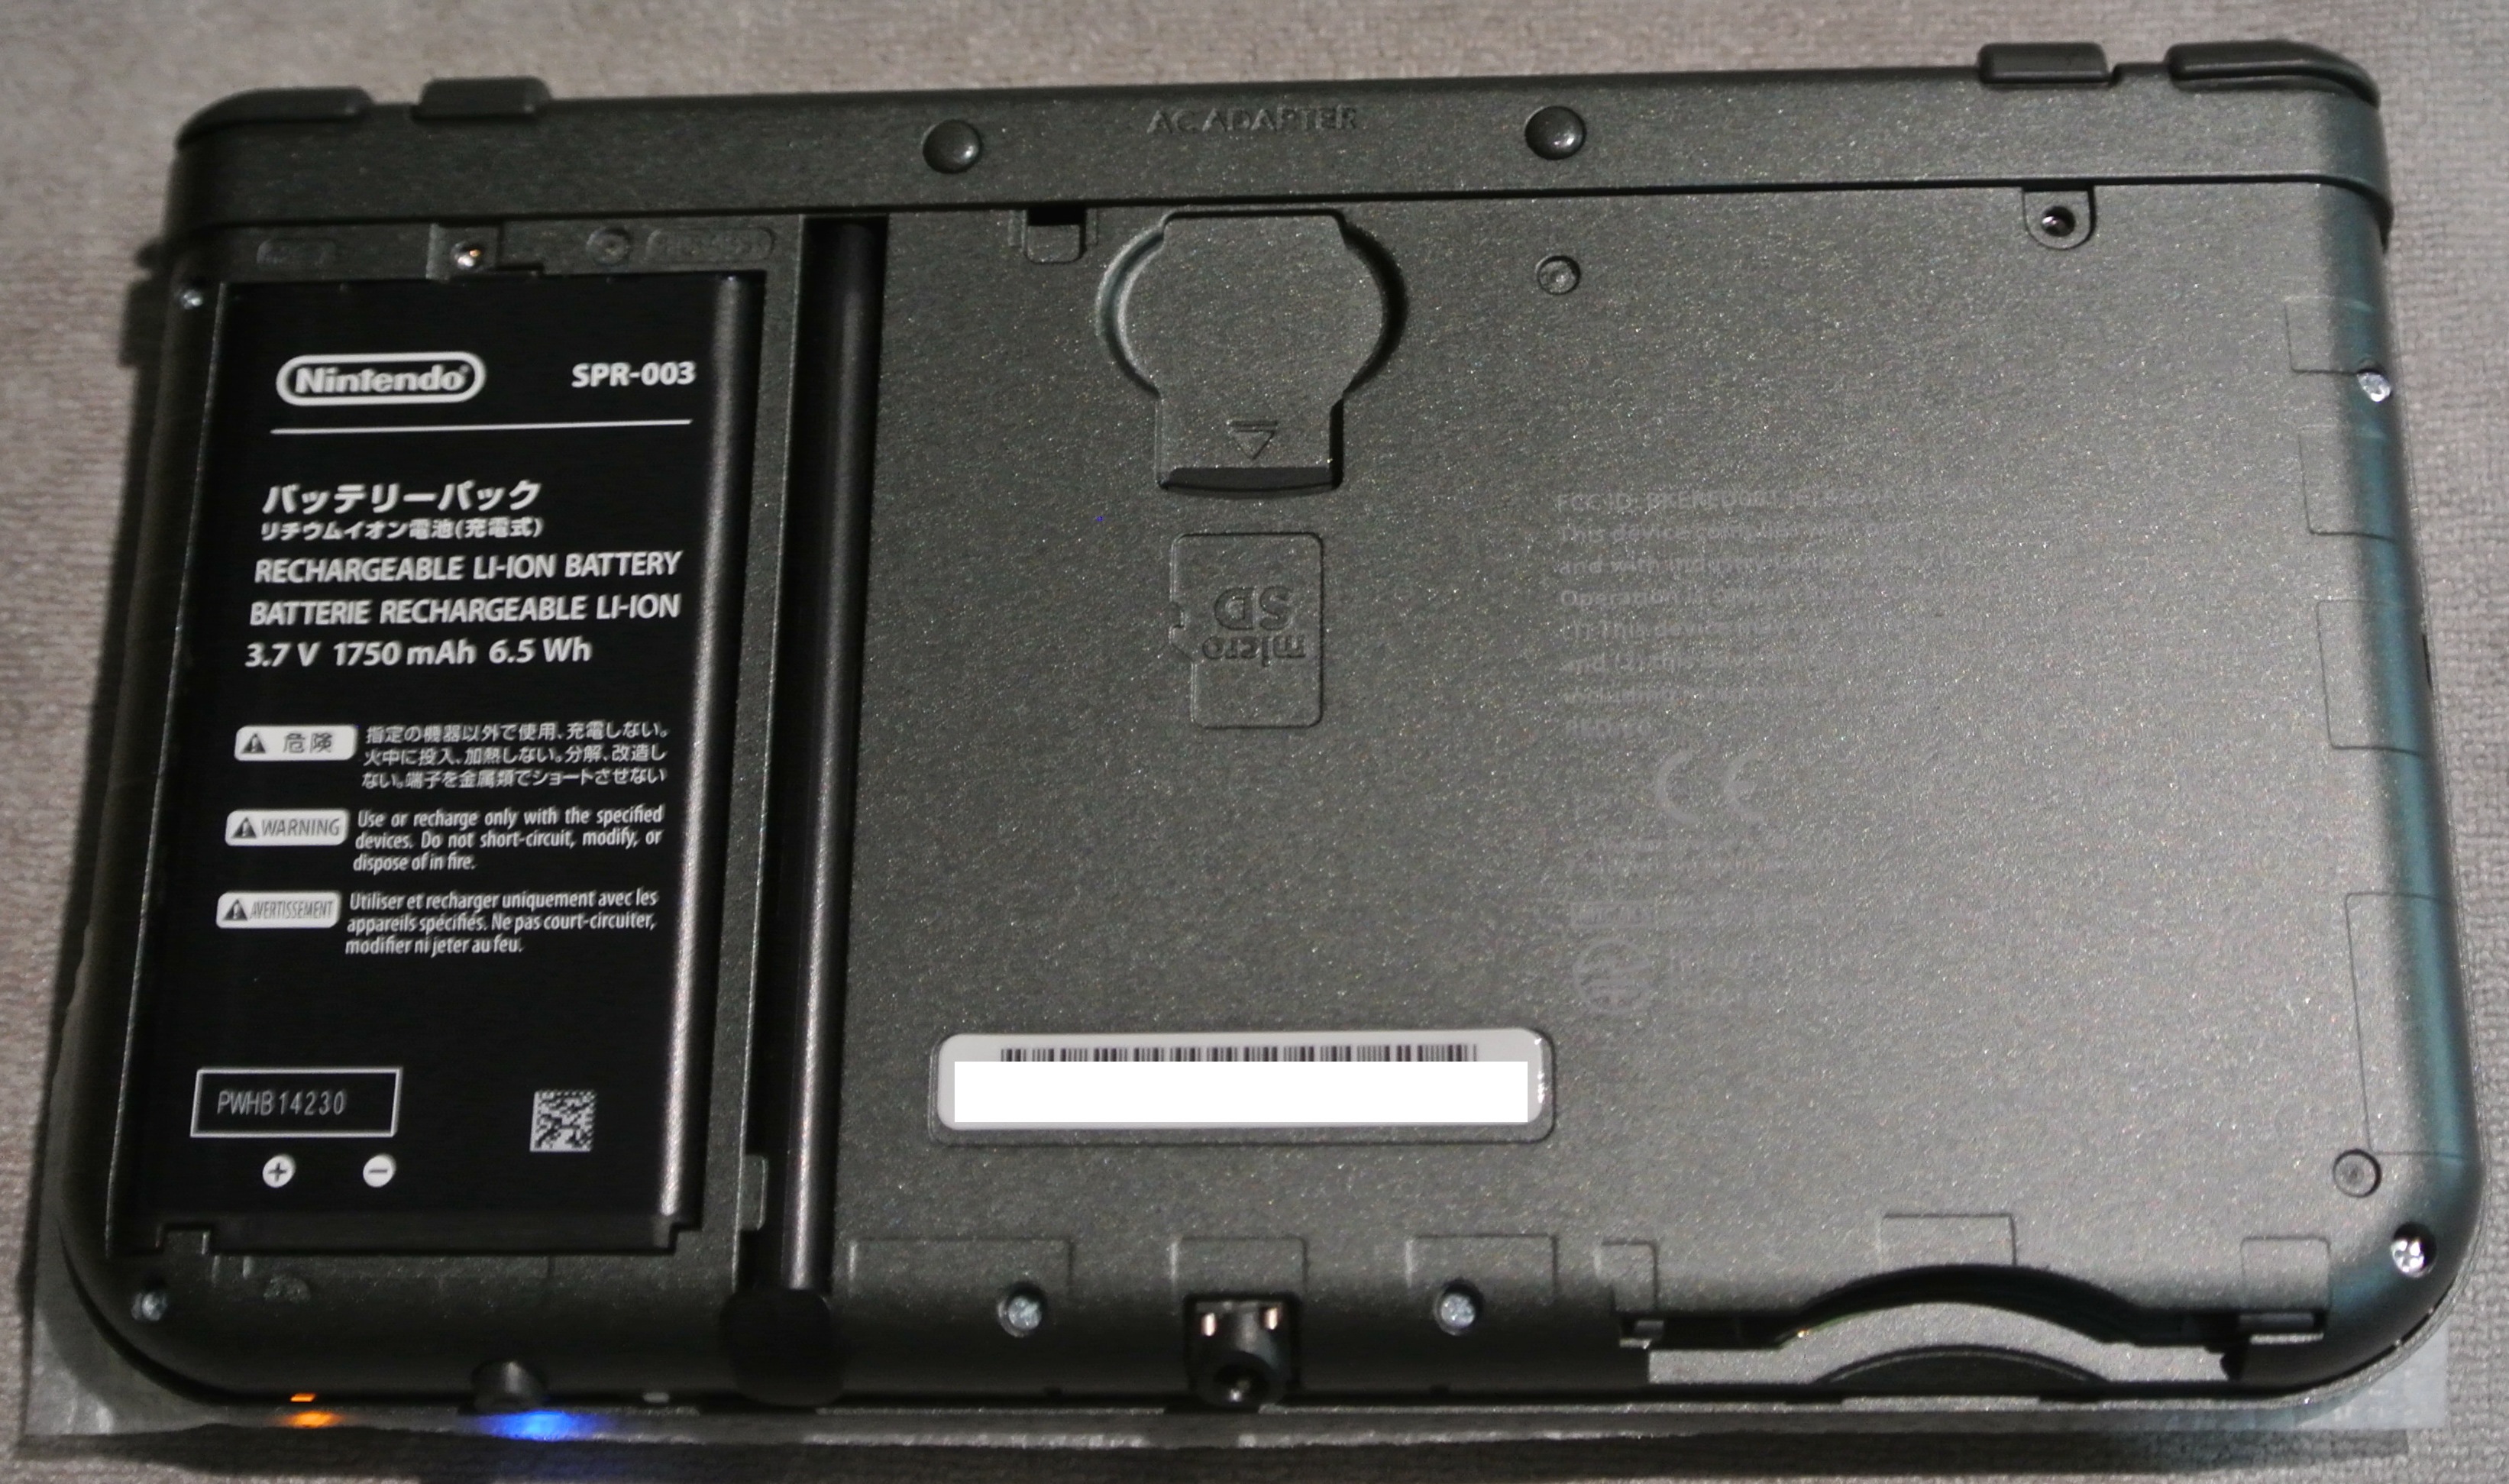 new 3ds xl sd card slot